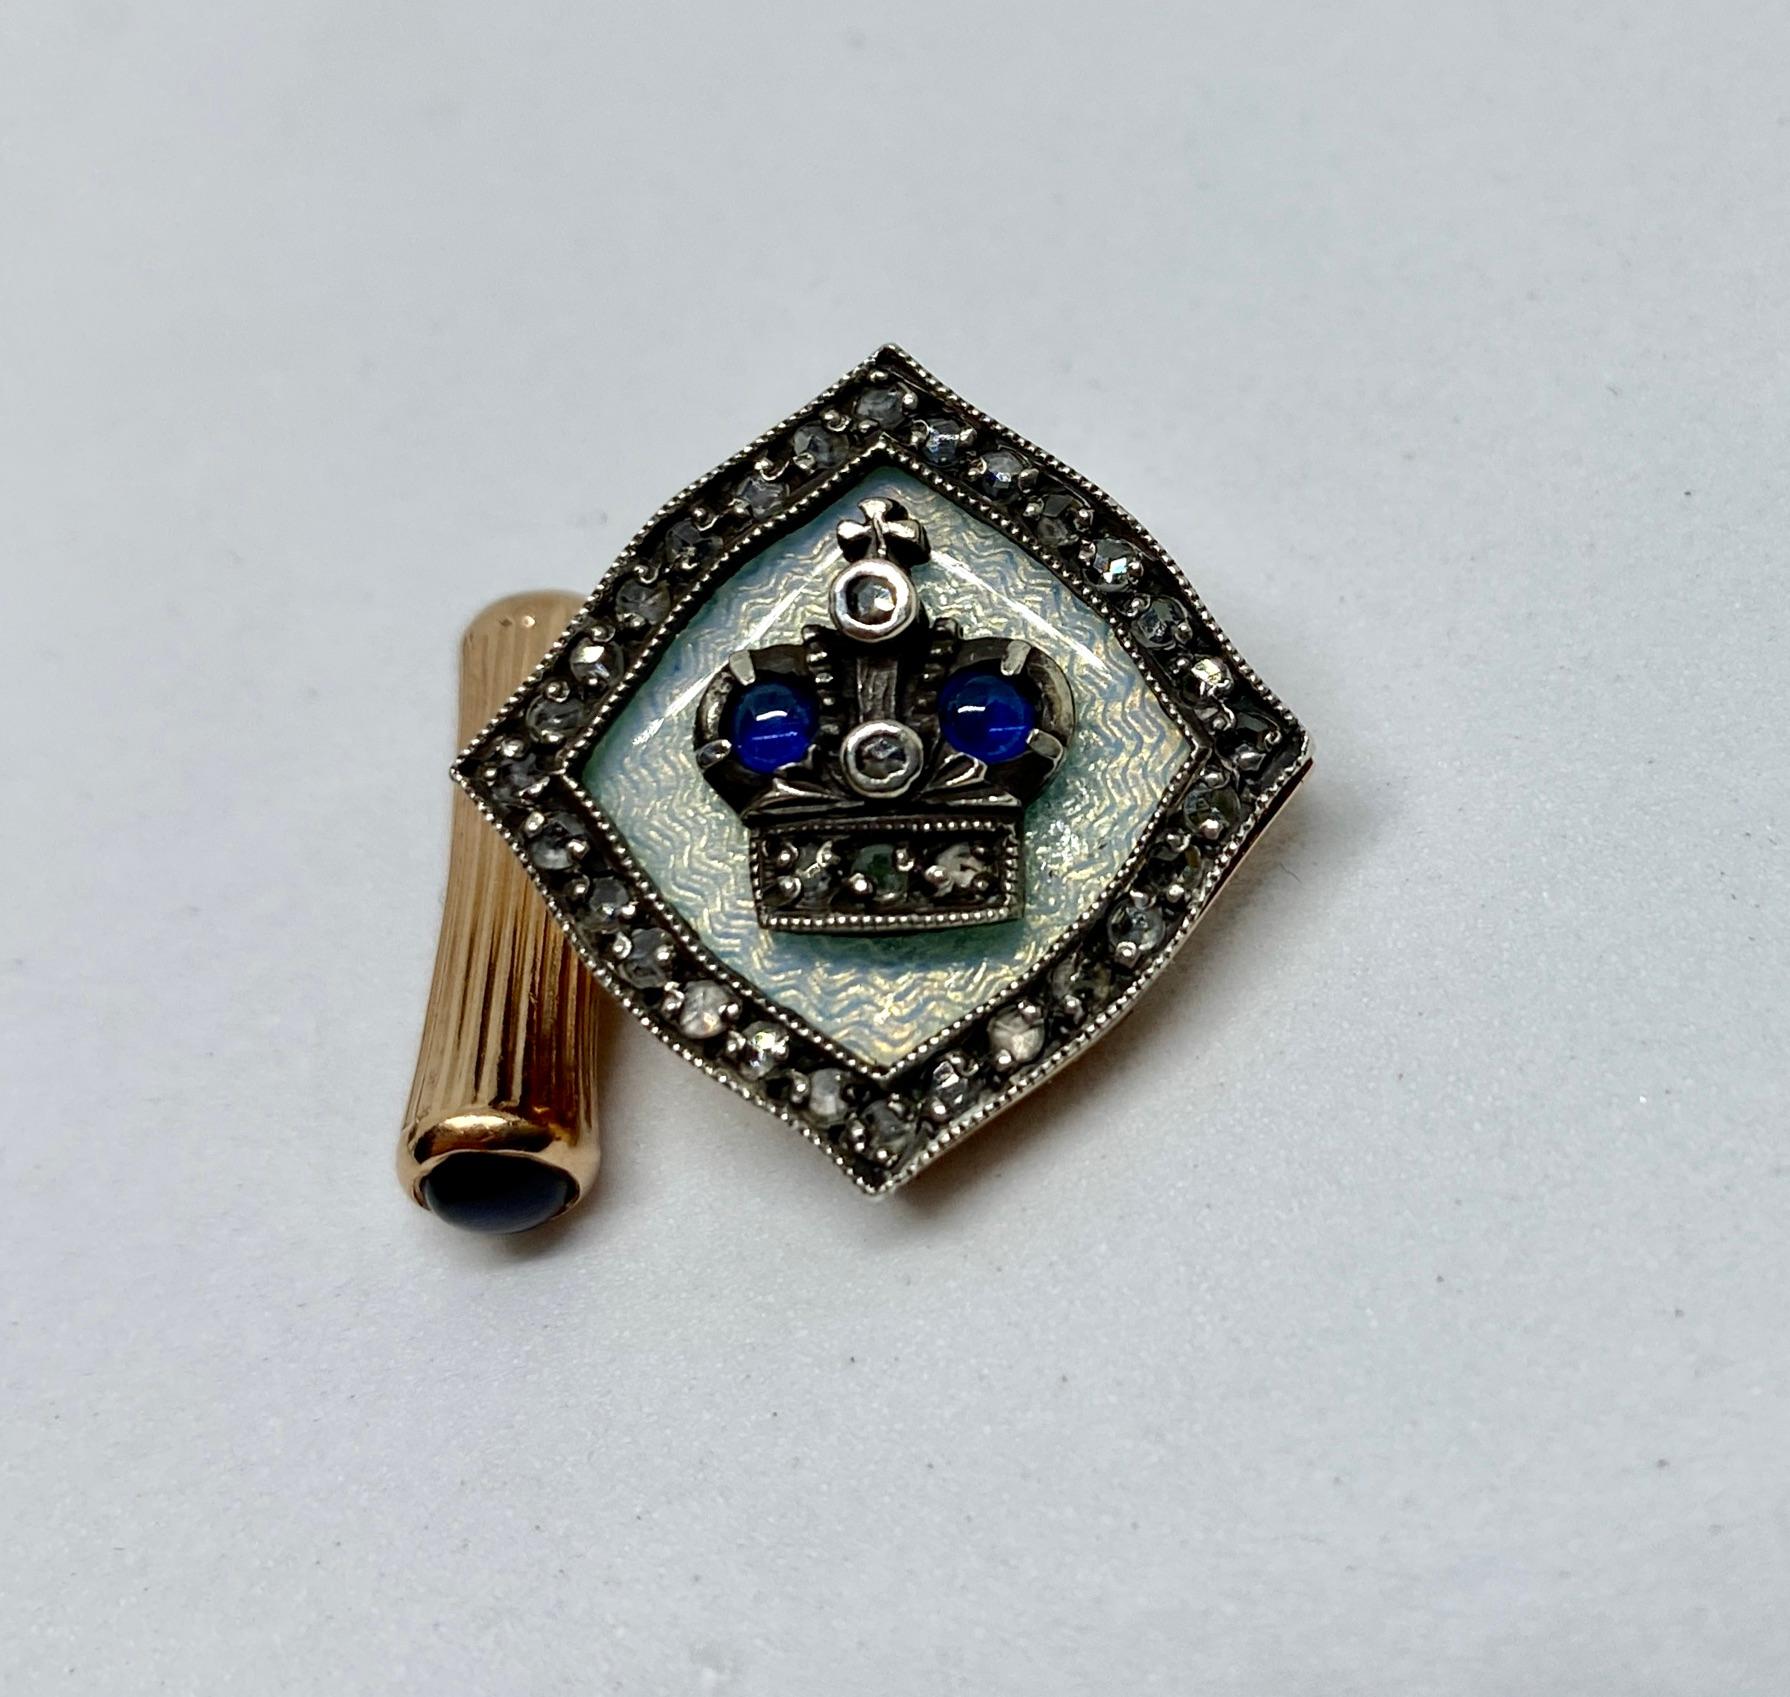 Stunning Imperial Russian cufflinks featuring a silver crown holding five rose-cut diamonds and two cabochon-cut sapphires on a white guilloché field.

These cufflinks were made in St. Petersburg around the turn of the 20th Century by Fabergé